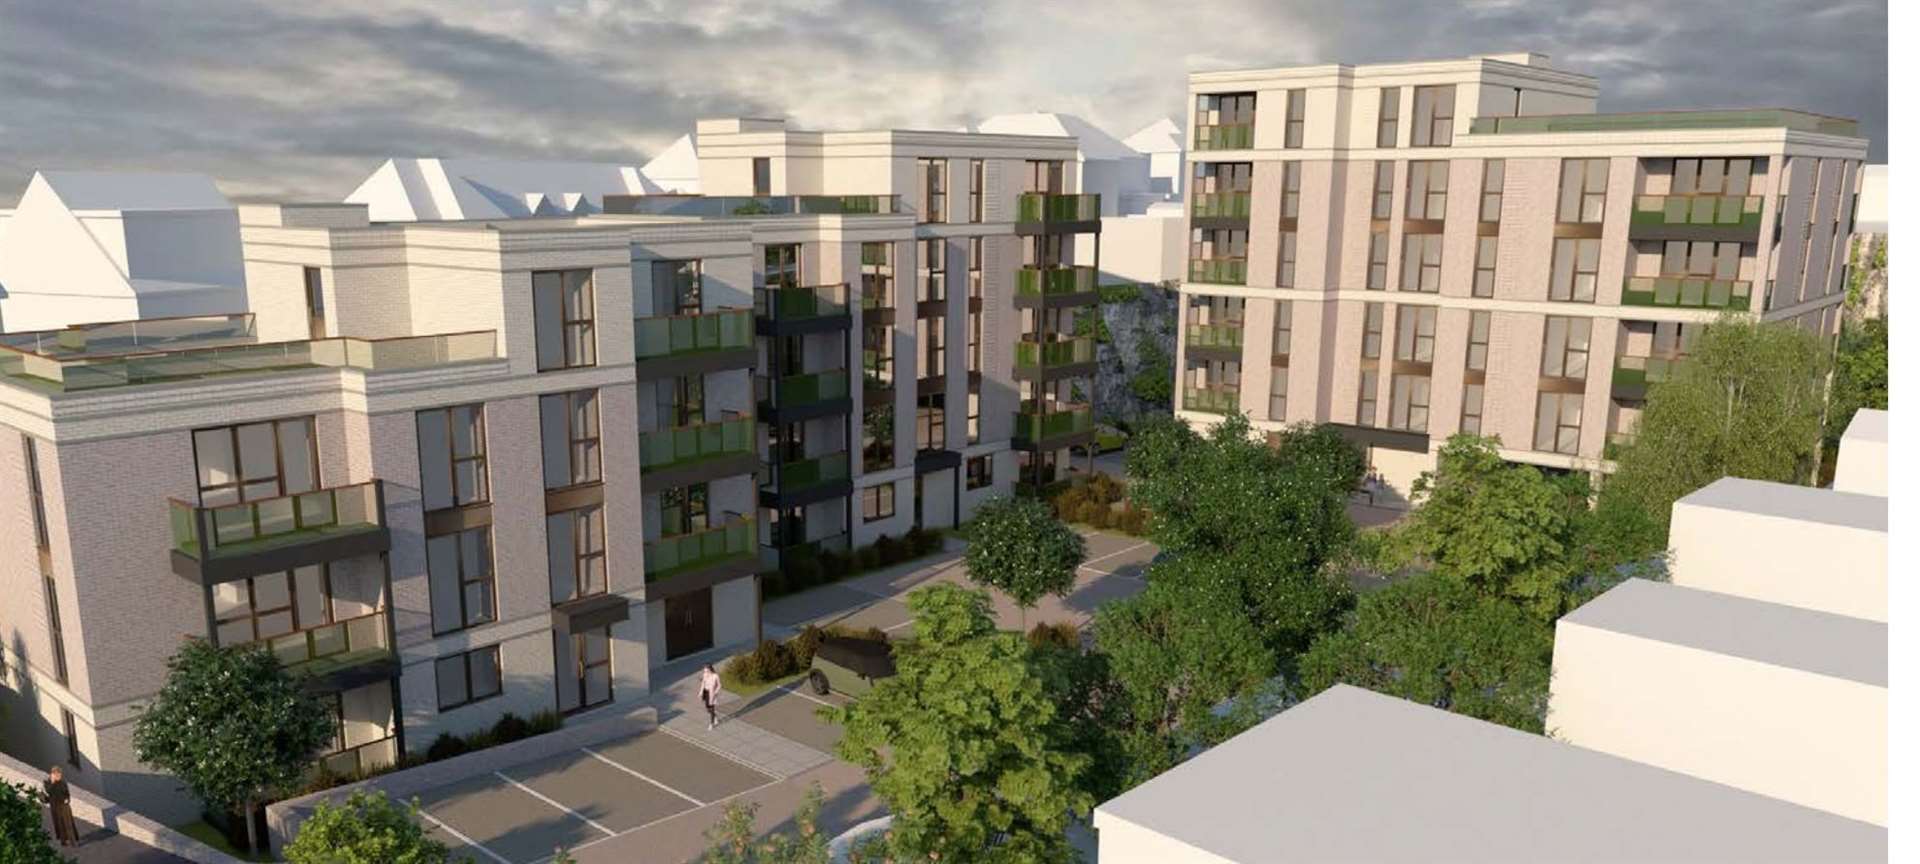 Plans have gone in for three blocks of flats off Broom Hill Road, Strood. Picture: Ubique Architects